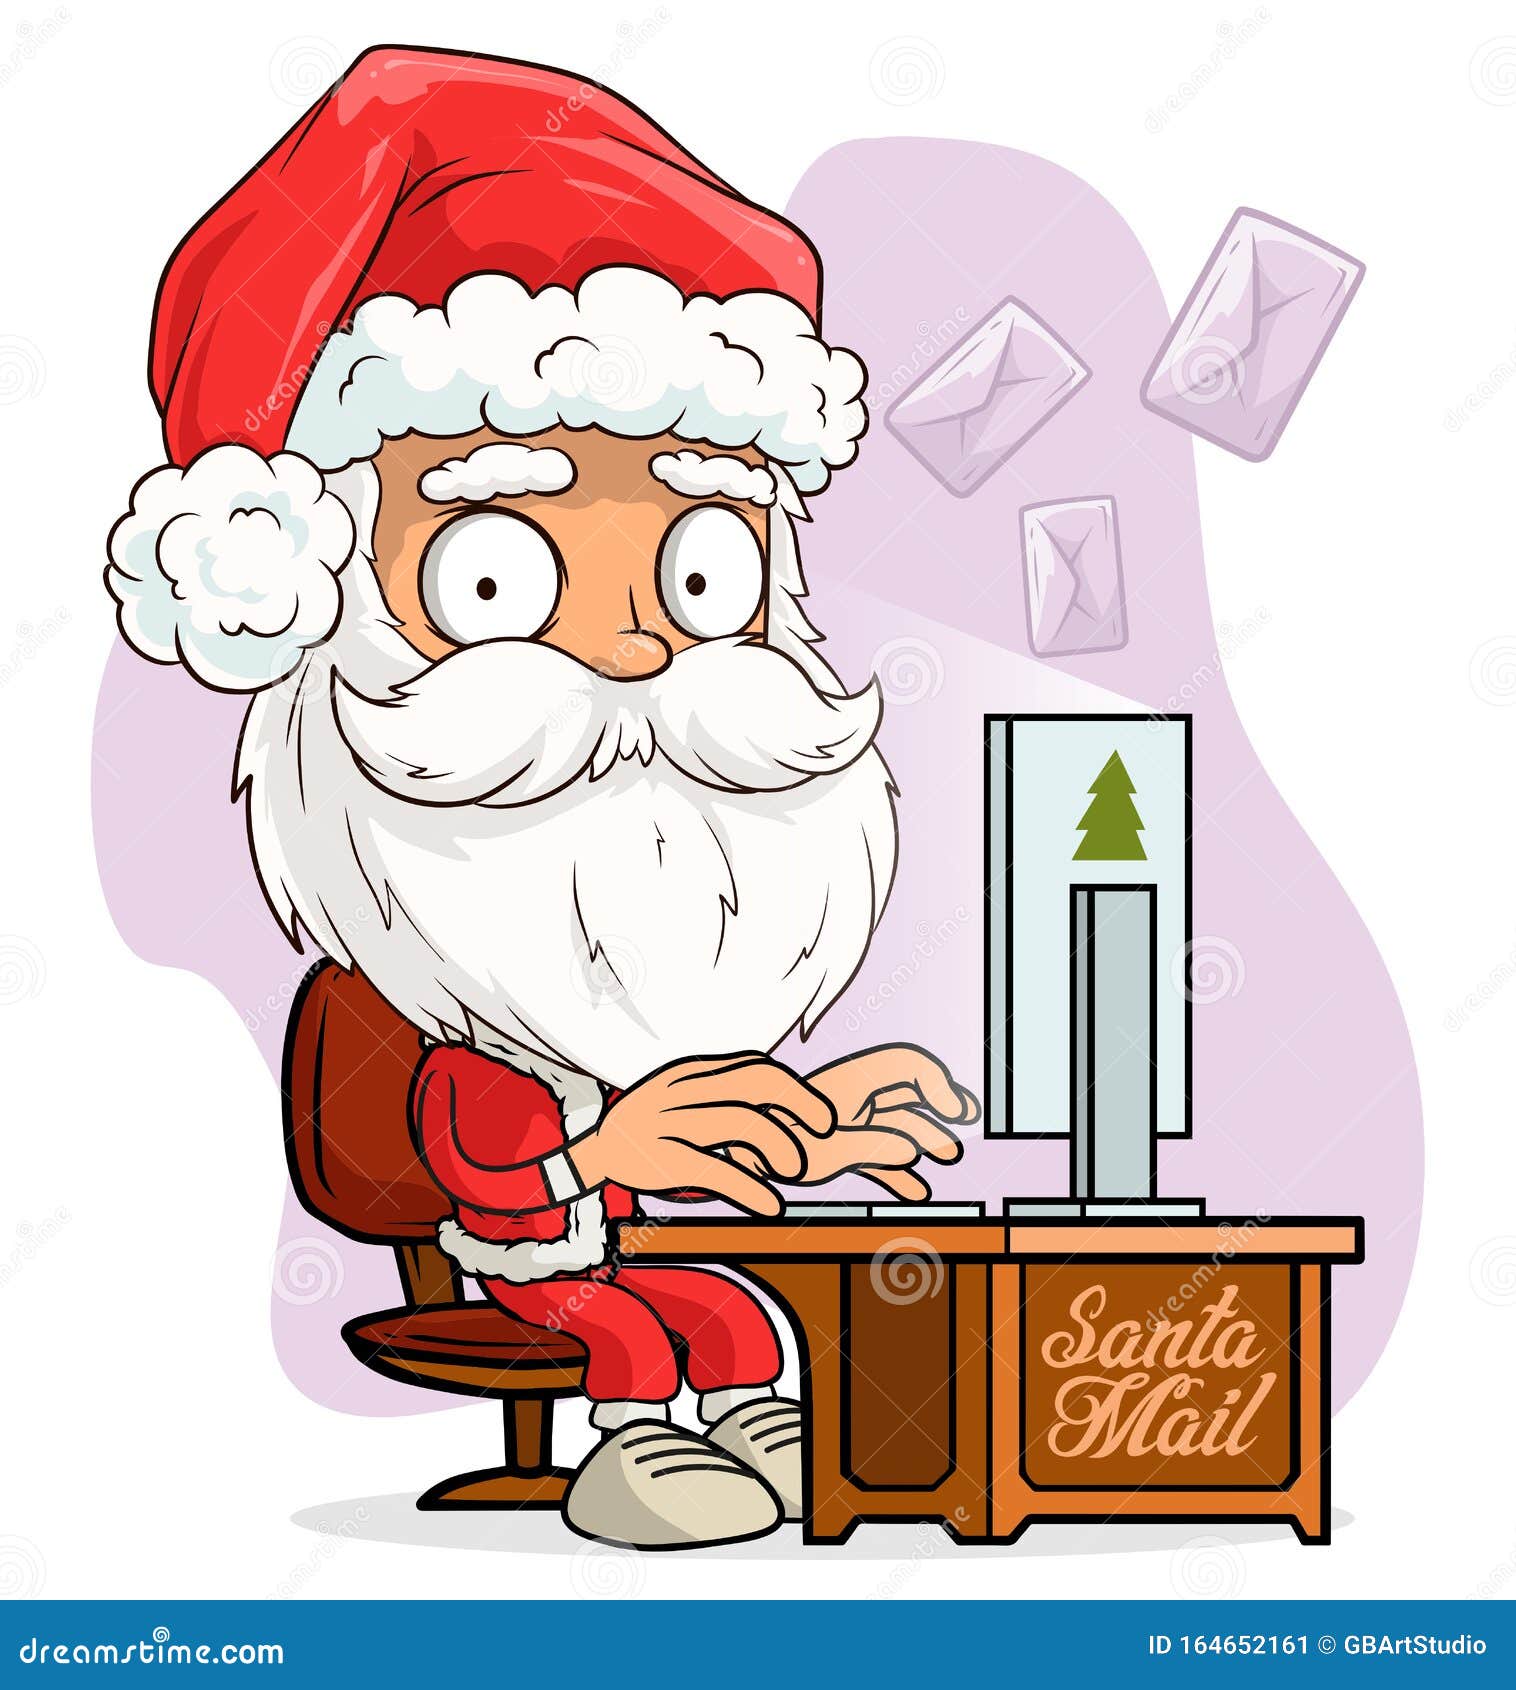 Cartoon Funny Santa Claus with Mail and Letters Stock Vector - Illustration  of cheerful, christmas: 164652161